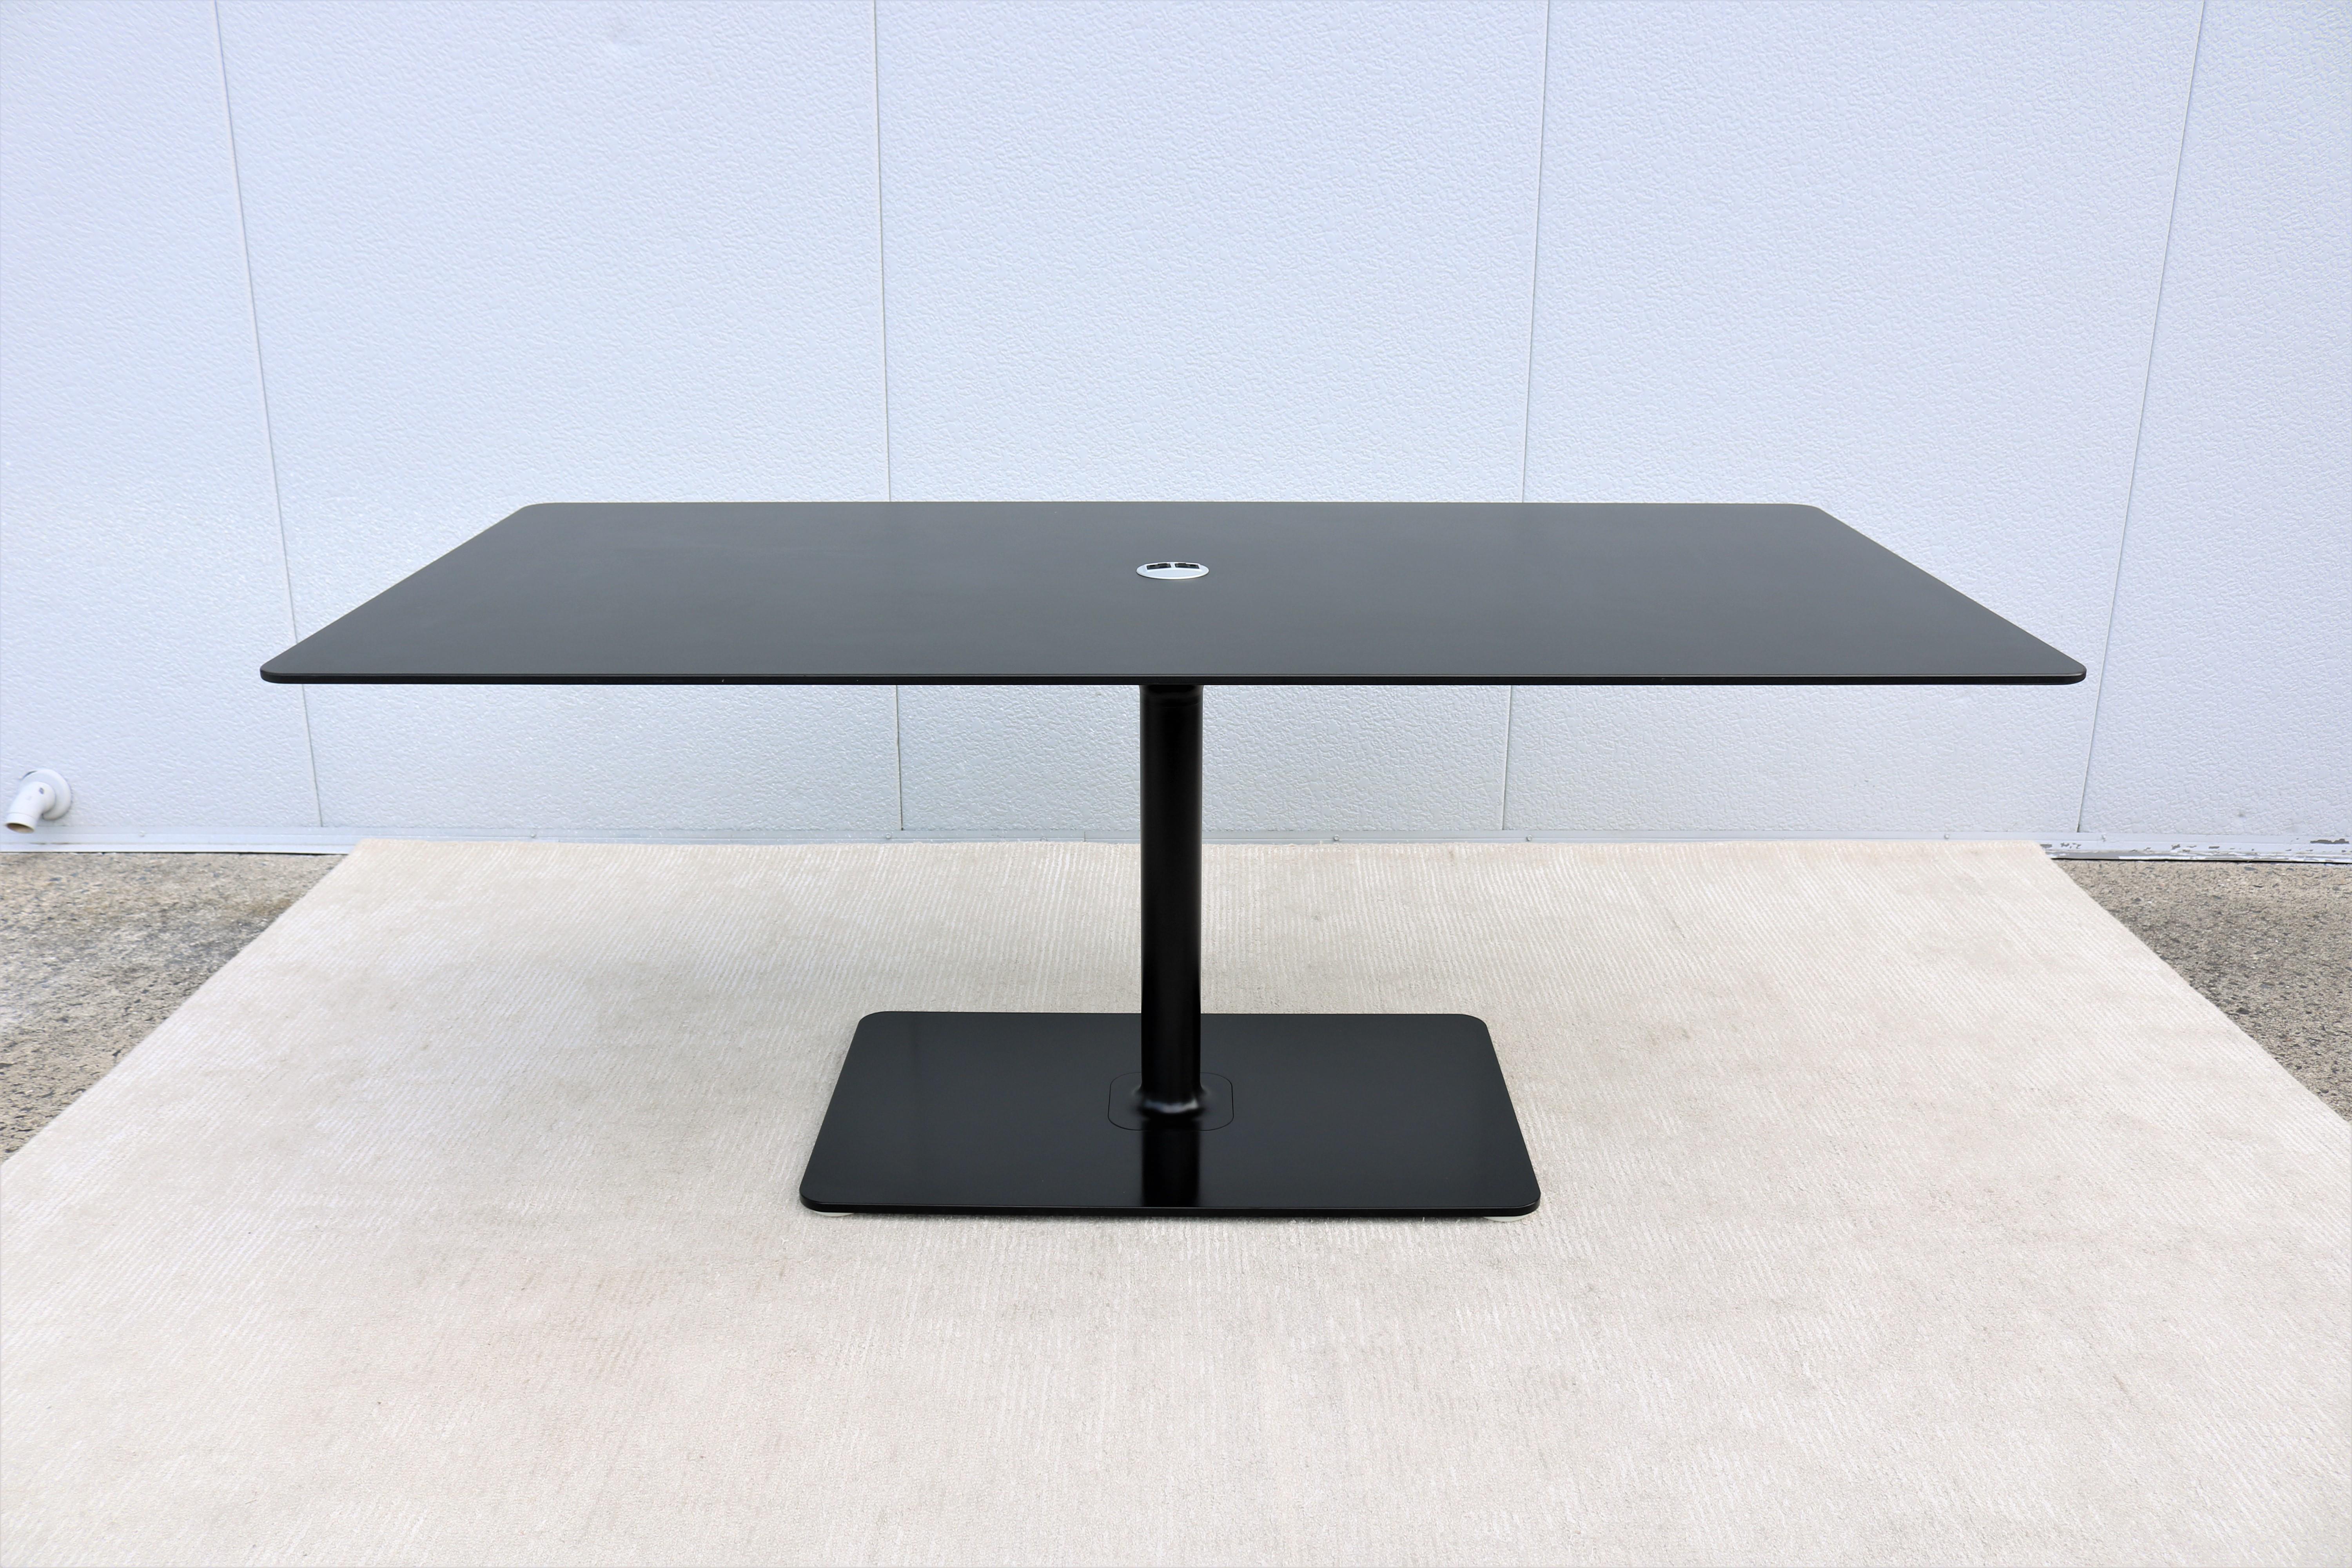 Elegant and sleek Lagunitas collaborative and conference table or work table, designed by Toan Nguyen for Coalesse.
The modern beauty and smart design of the Lagunitas will integrates simply and cleanly with any space, offering elegance and function